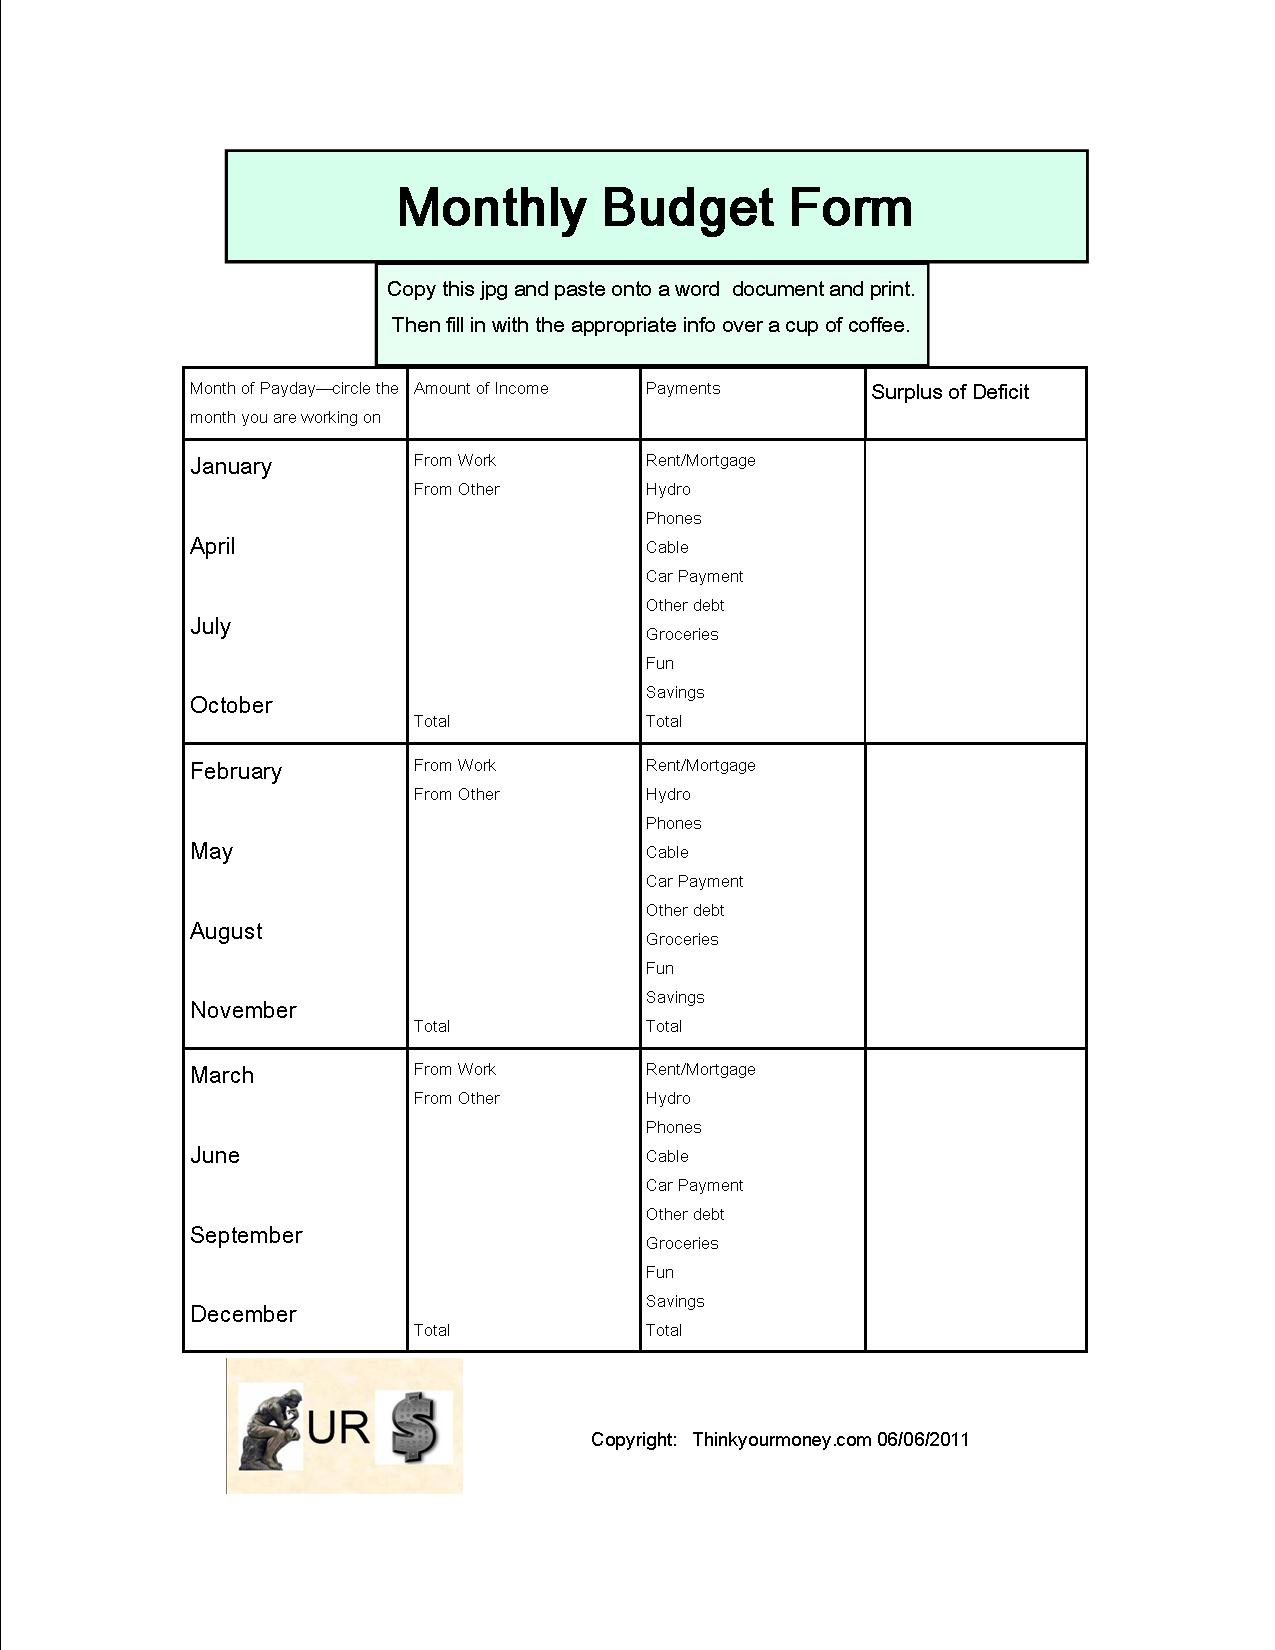 Monthly Budget Expenses Spreadsheet In Monthly Budget Spreadsheet